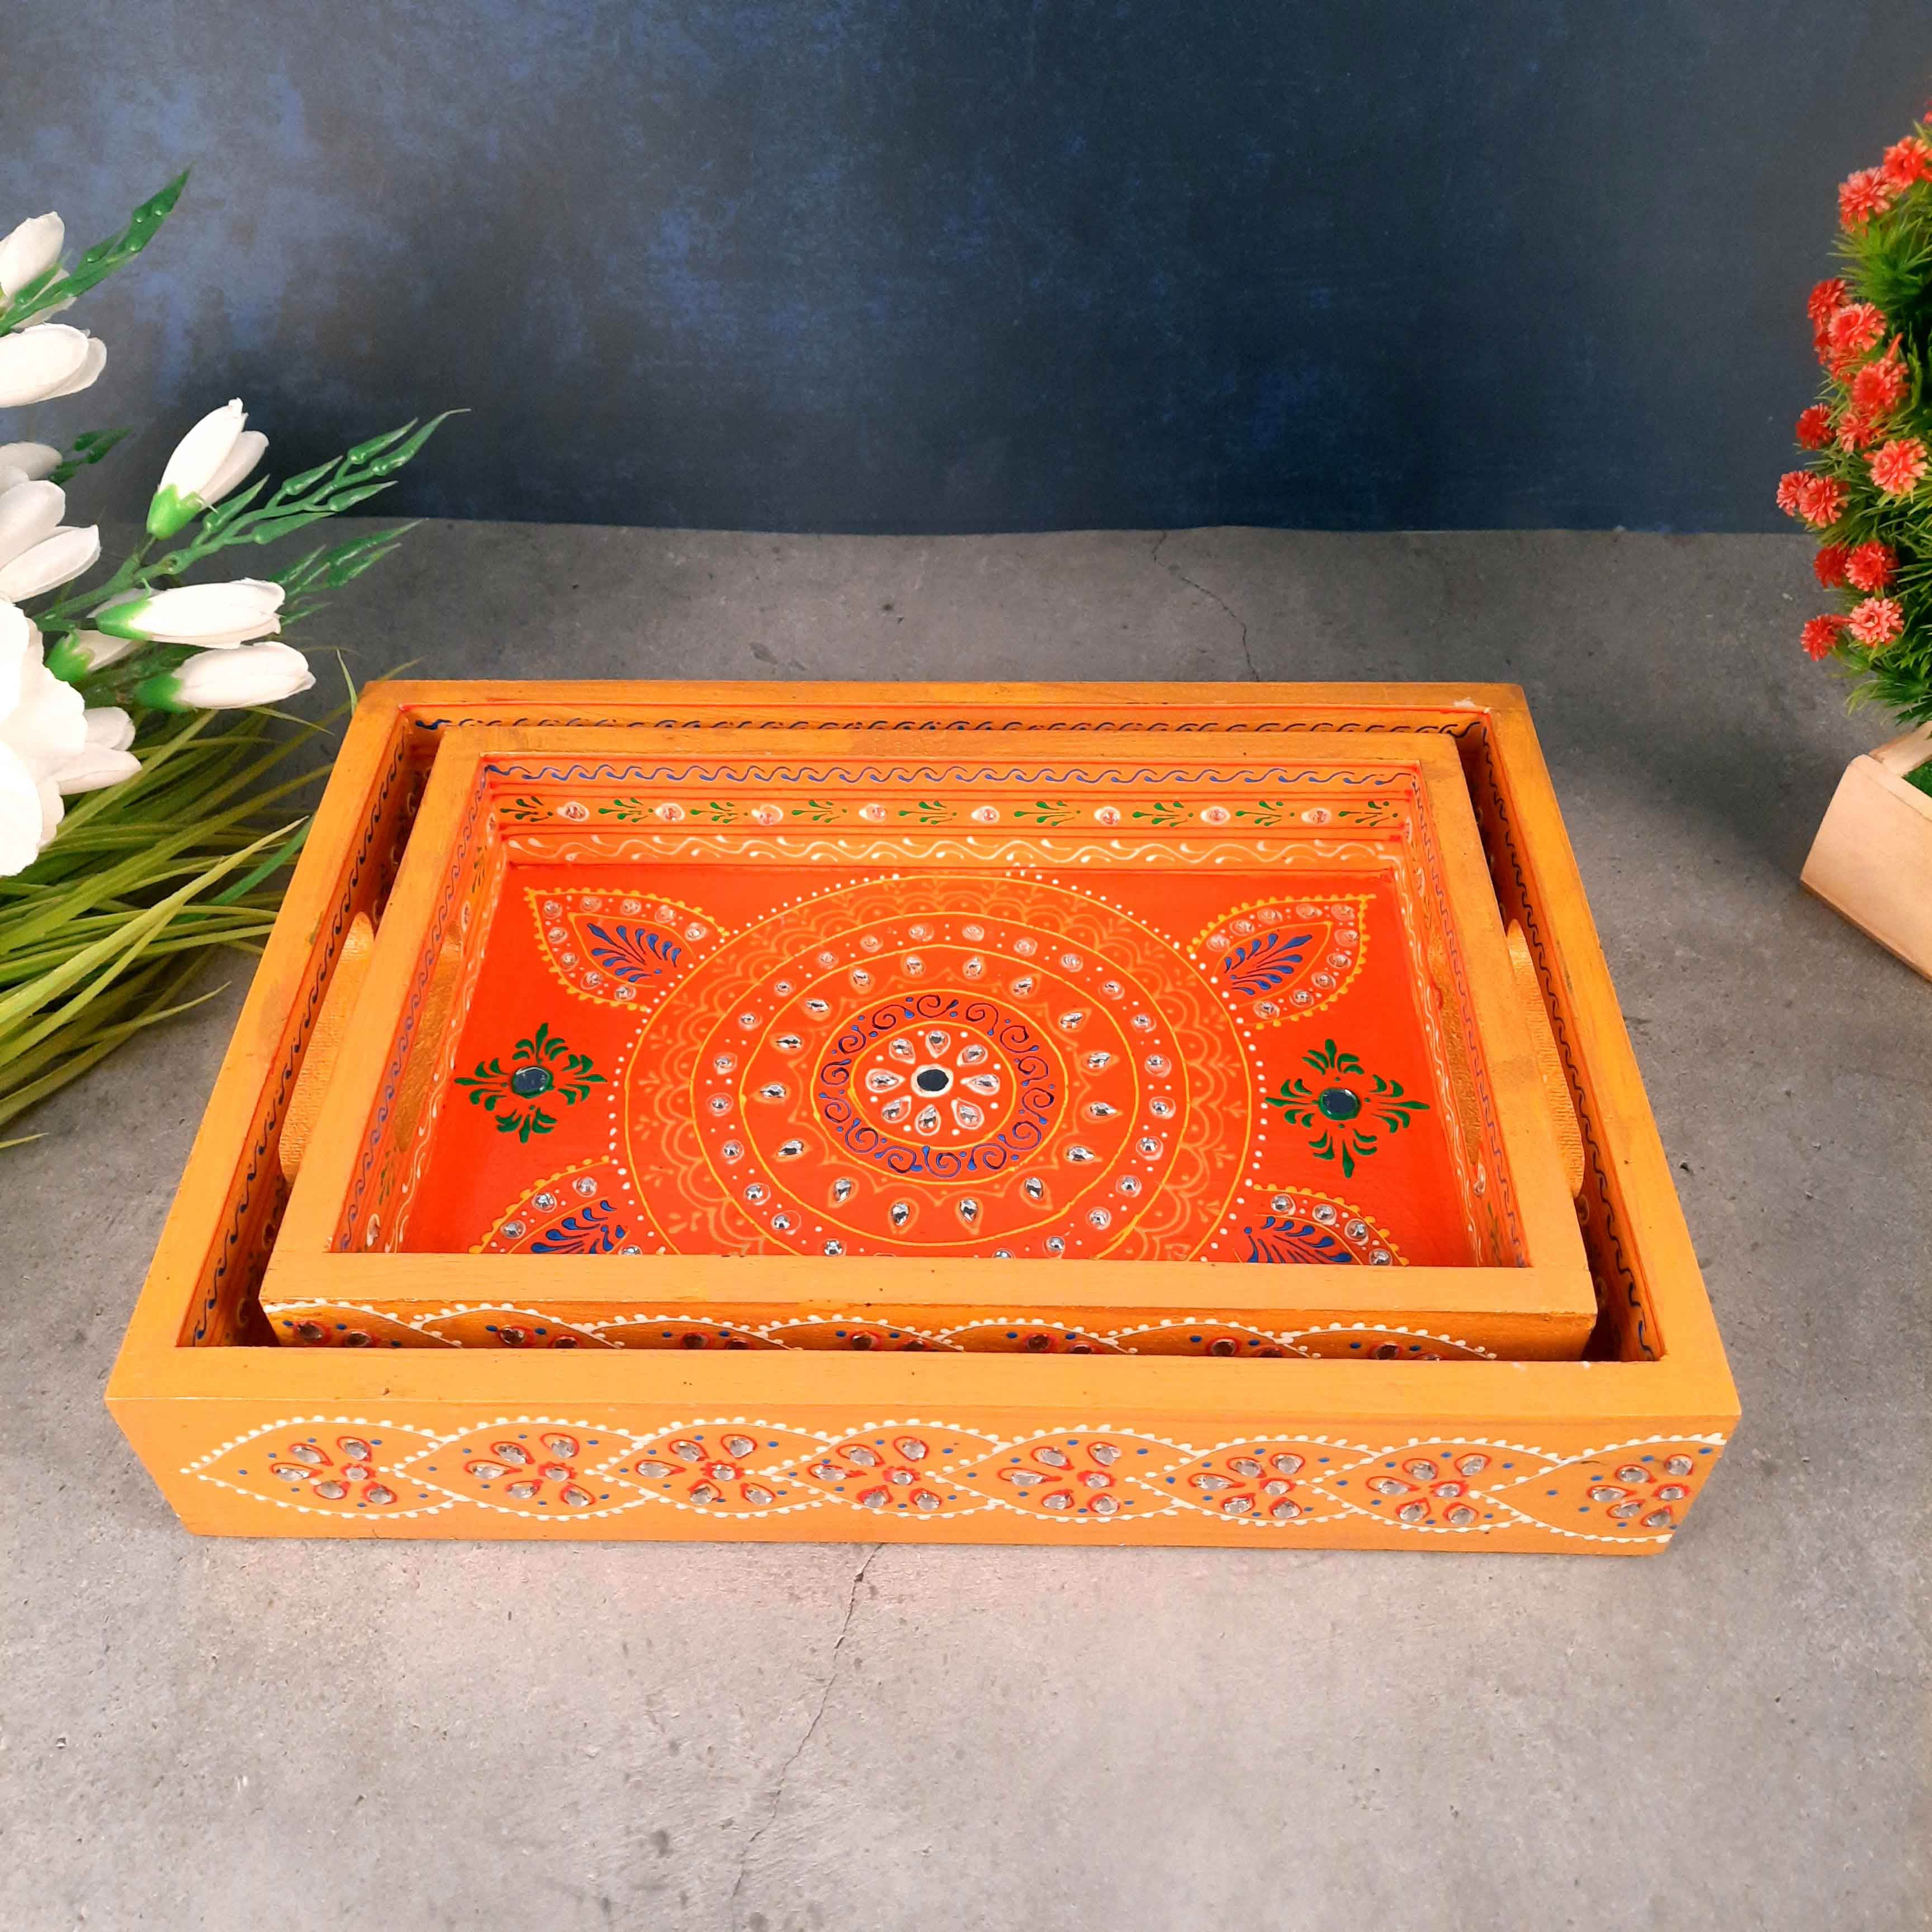 Tray Wooden | Tea & Snacks Serving Platter | Decorative Handcrafted Trays - for Home, Dining Table, Kitchen Decor | Wedding & Housewarming Gift - 14 Inch